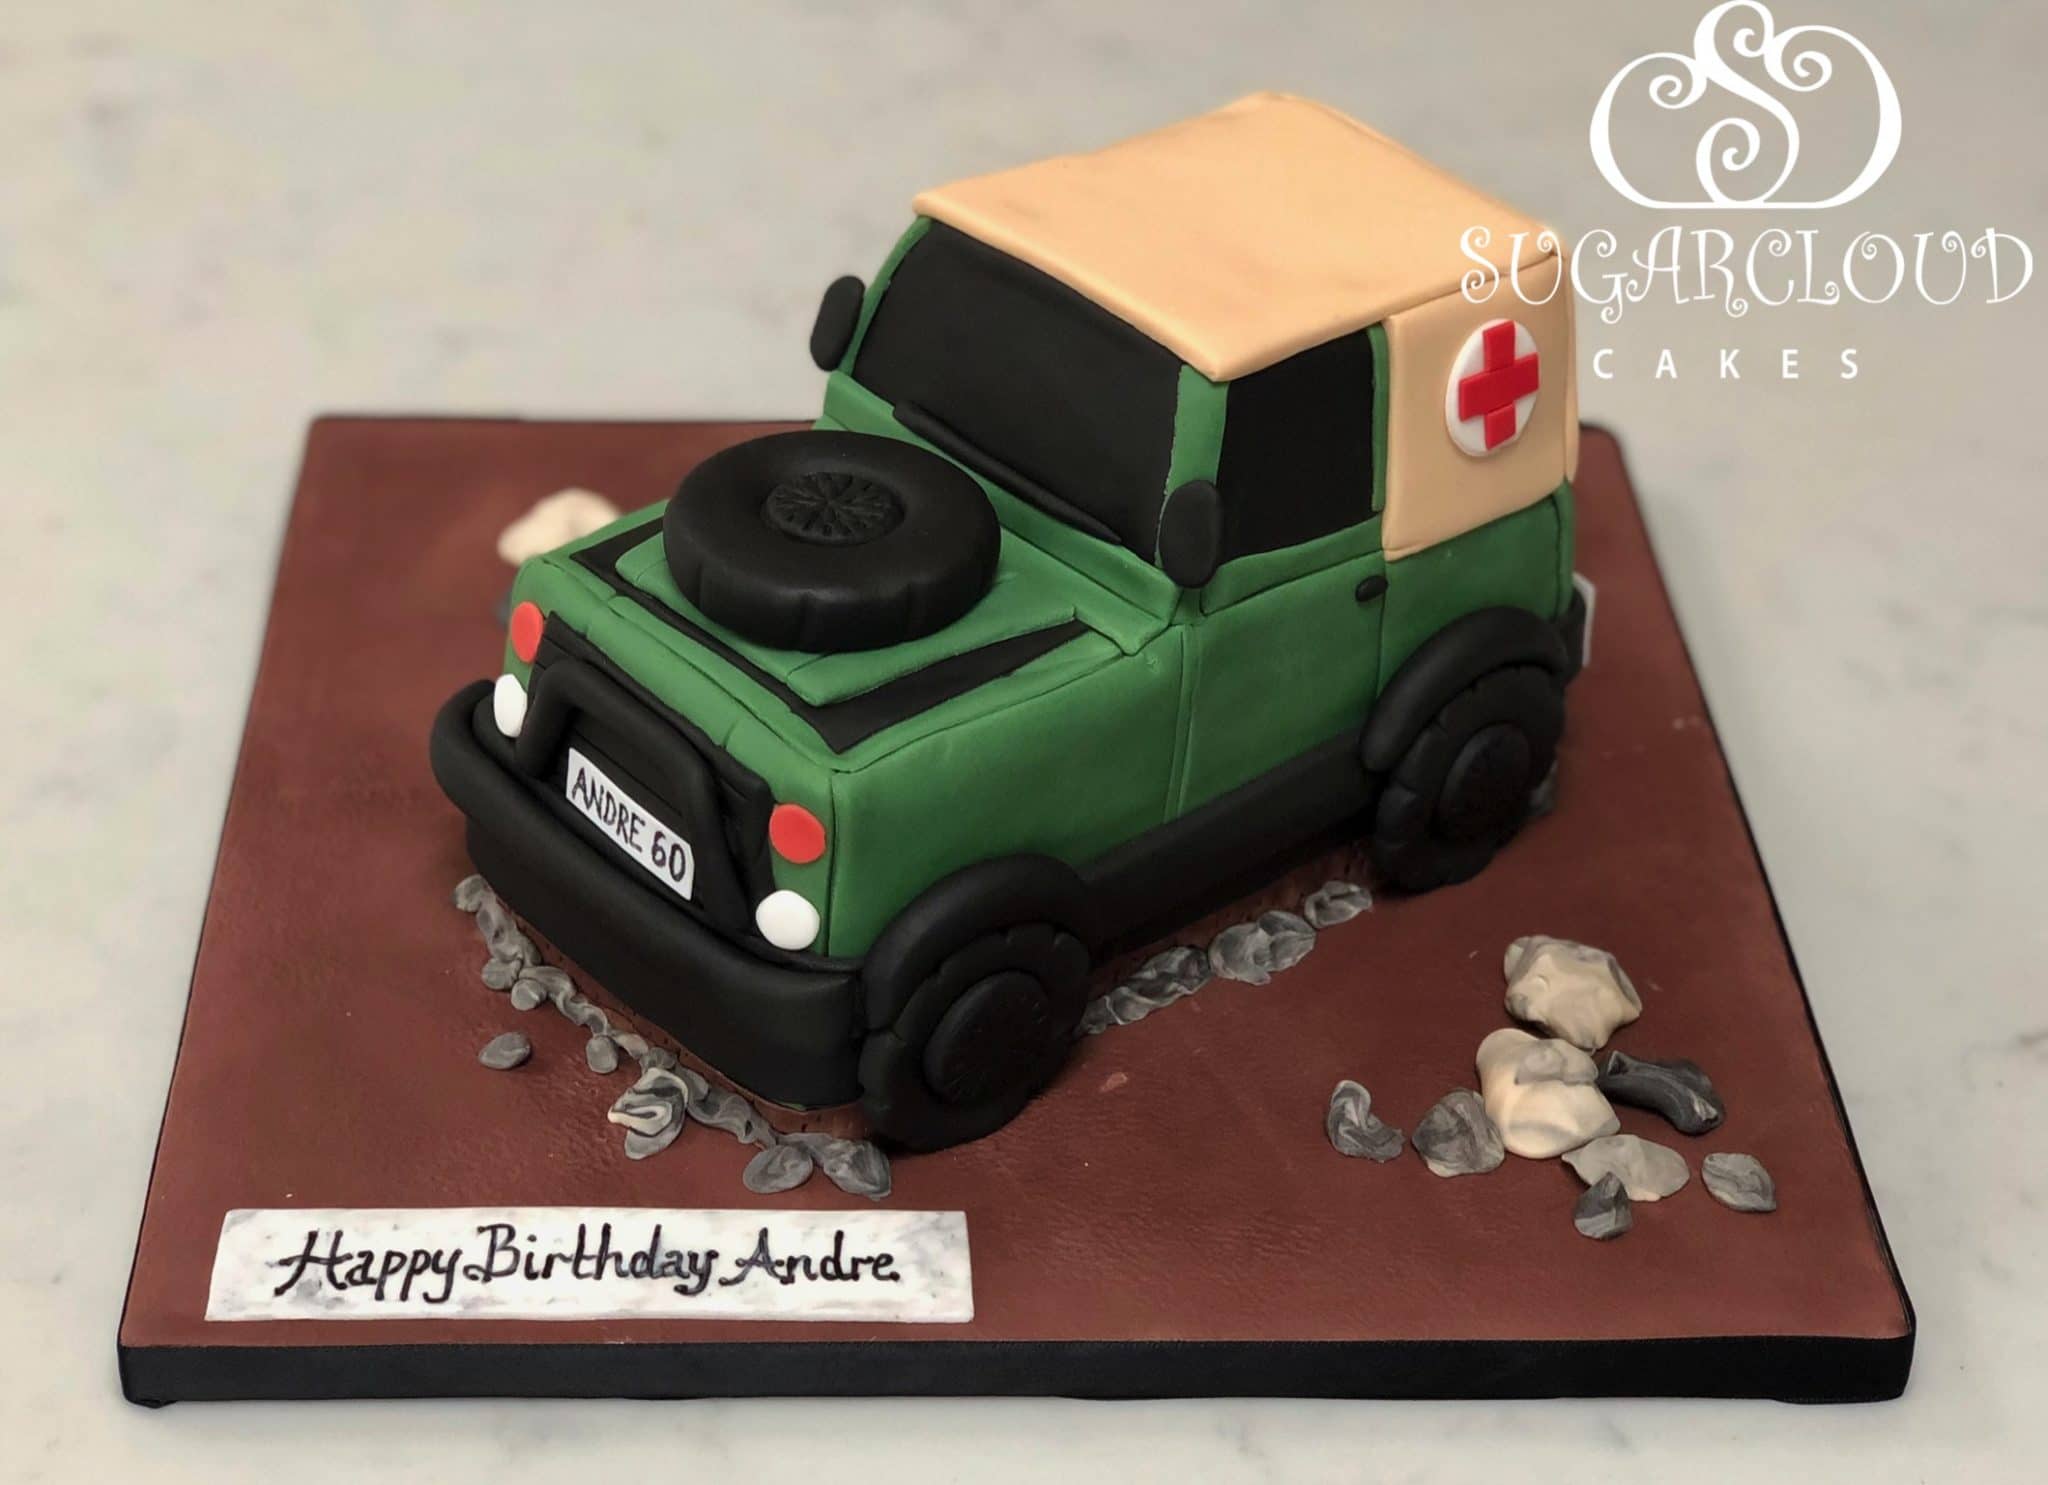 A Red Cross Land Rover Medic Vehicle for André's 60th Birthday